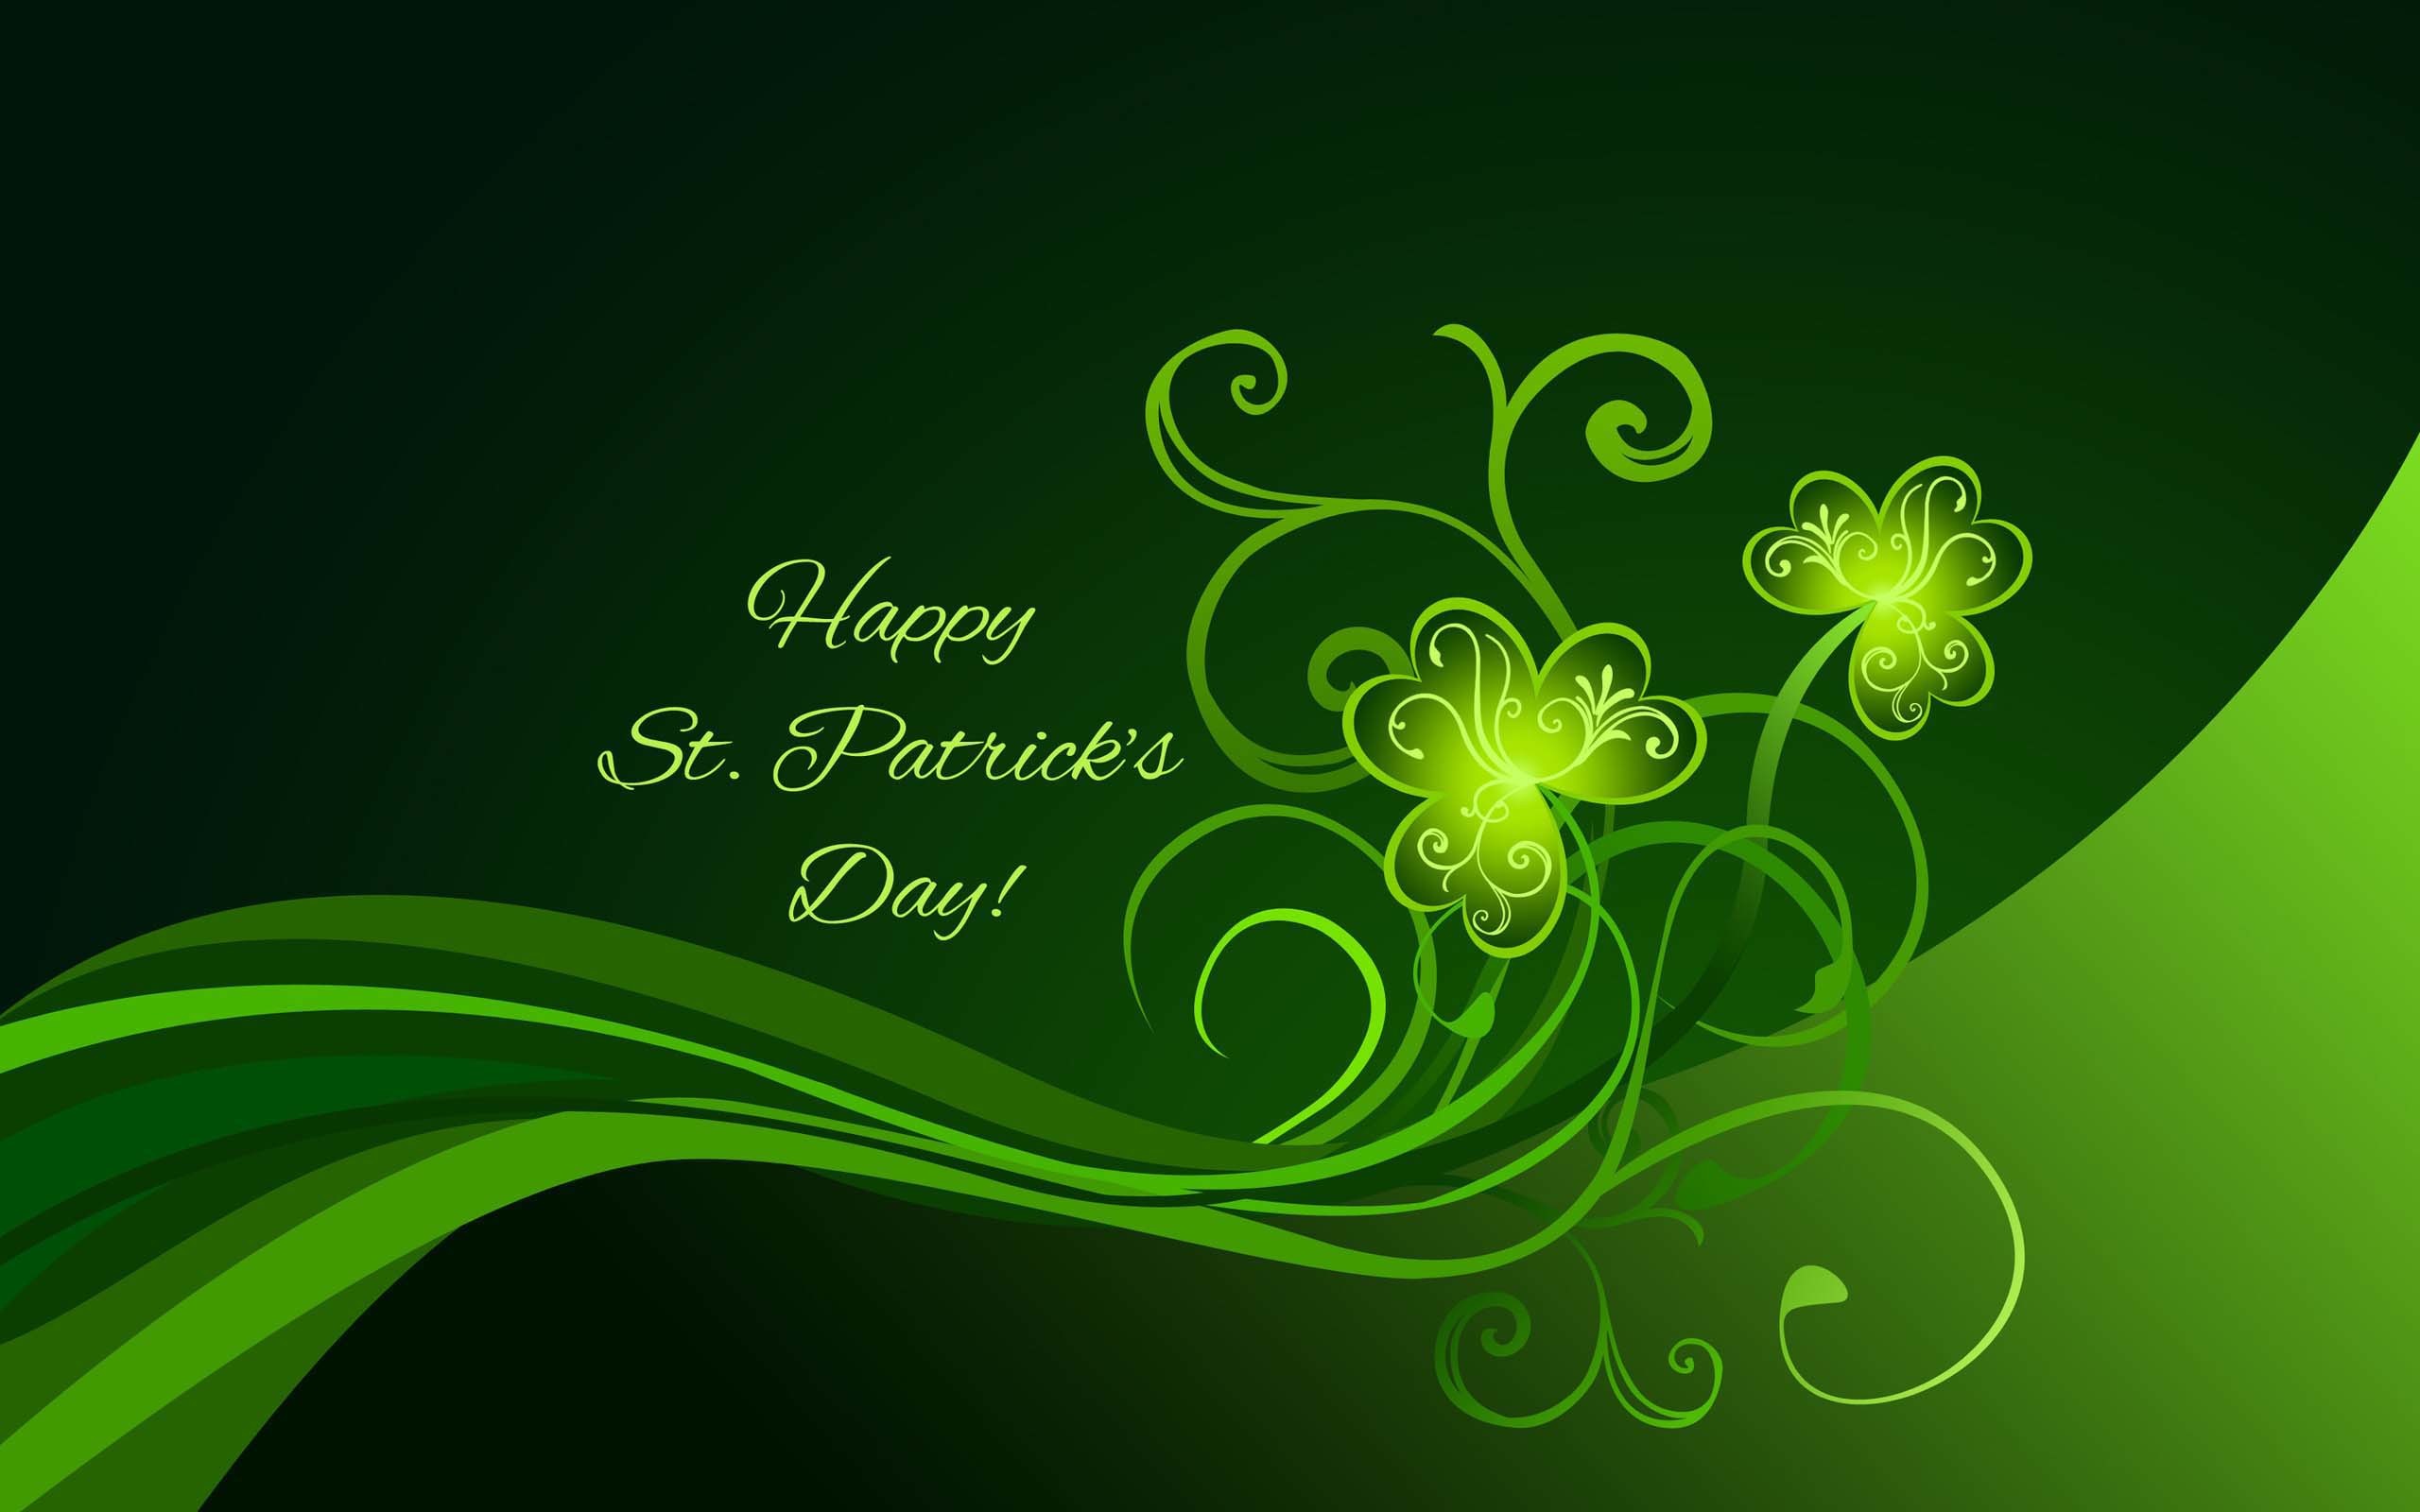 Download St Patricks day Wallpaper by brendolan  f8  Free on ZEDGE now  Browse millions  St patricks day wallpaper St patricks day pictures  Holiday wallpaper